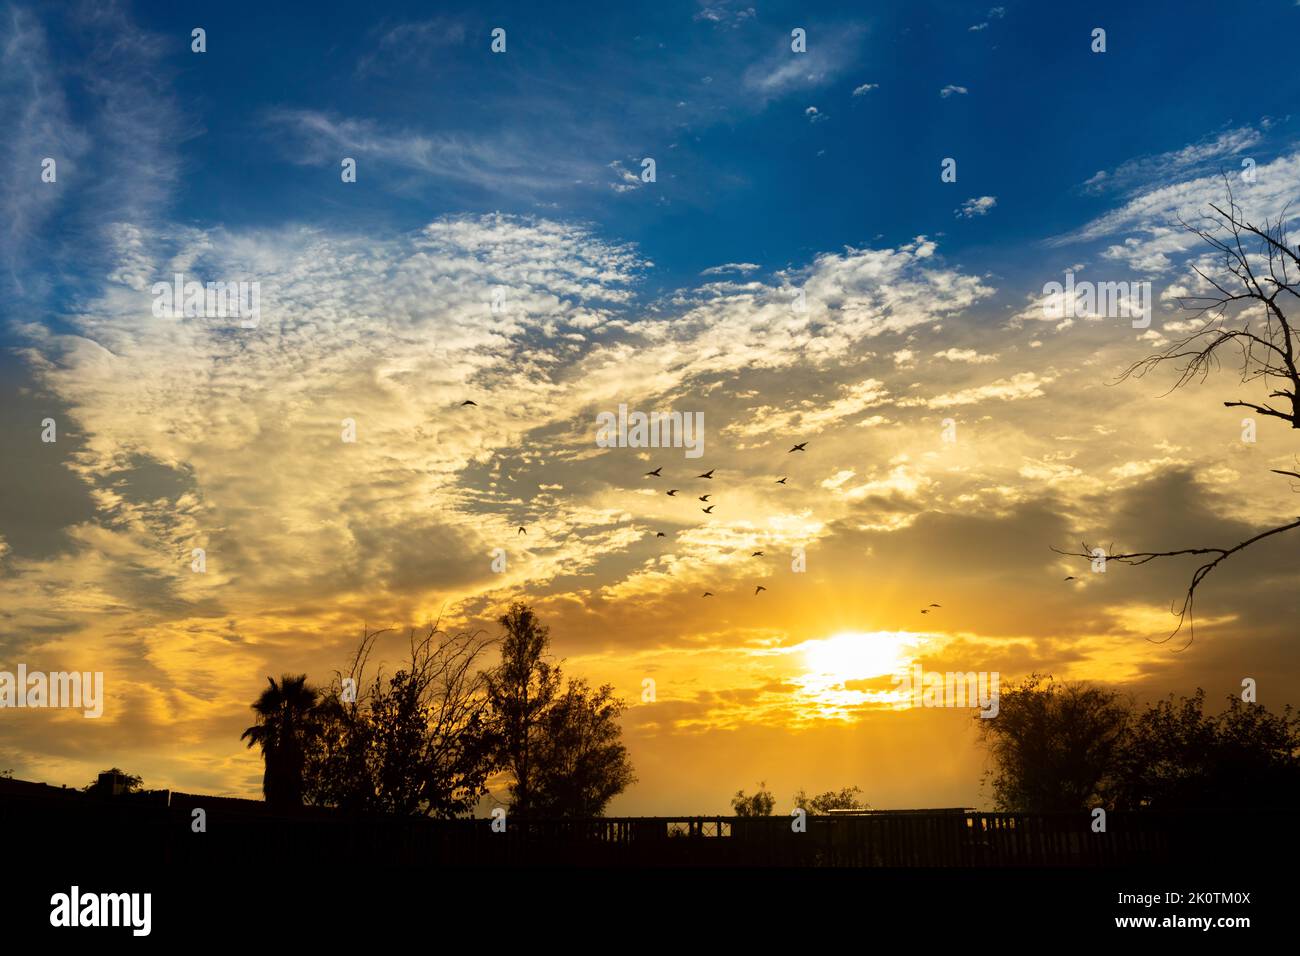 Western countryside sunrise with flying birds in the sky and silhouette trees Stock Photo